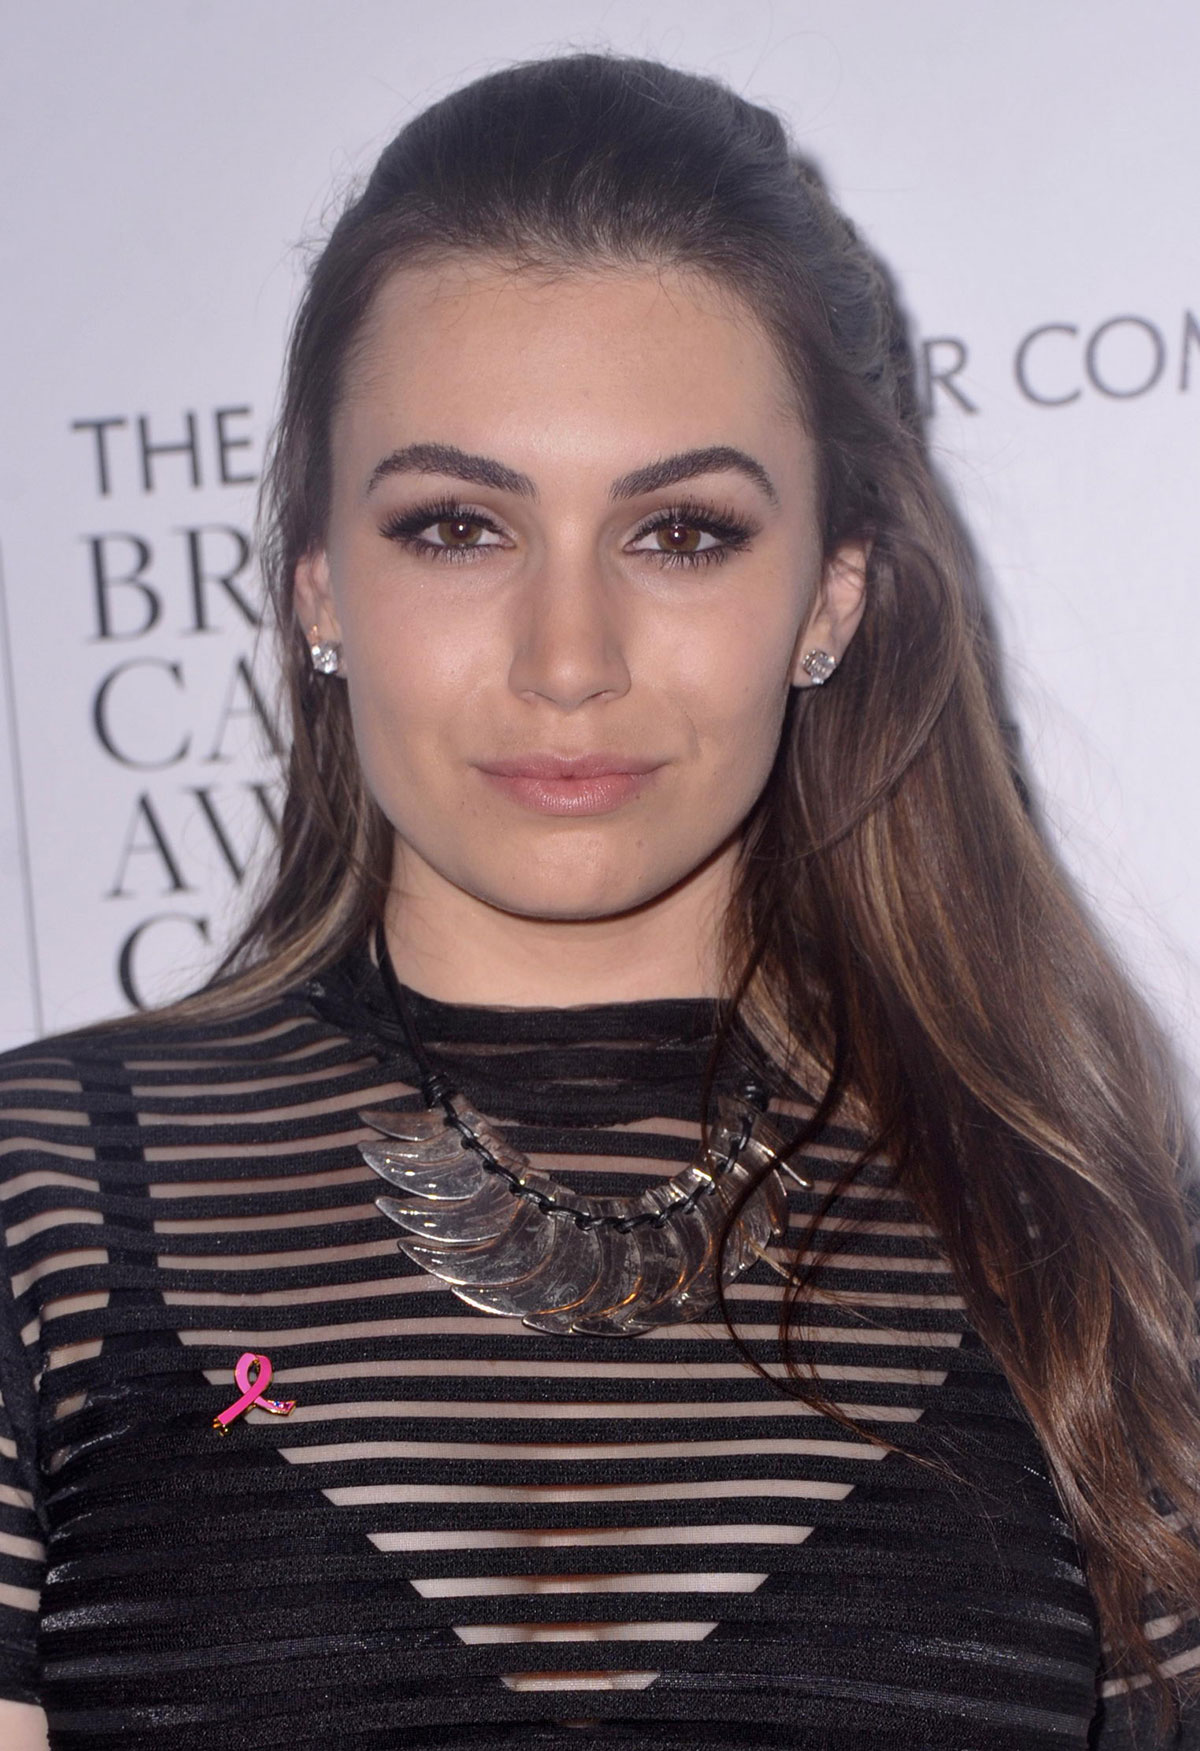 Sophie Simmons attends Cinema Society special screening of Hear Our Stories. Share Yours